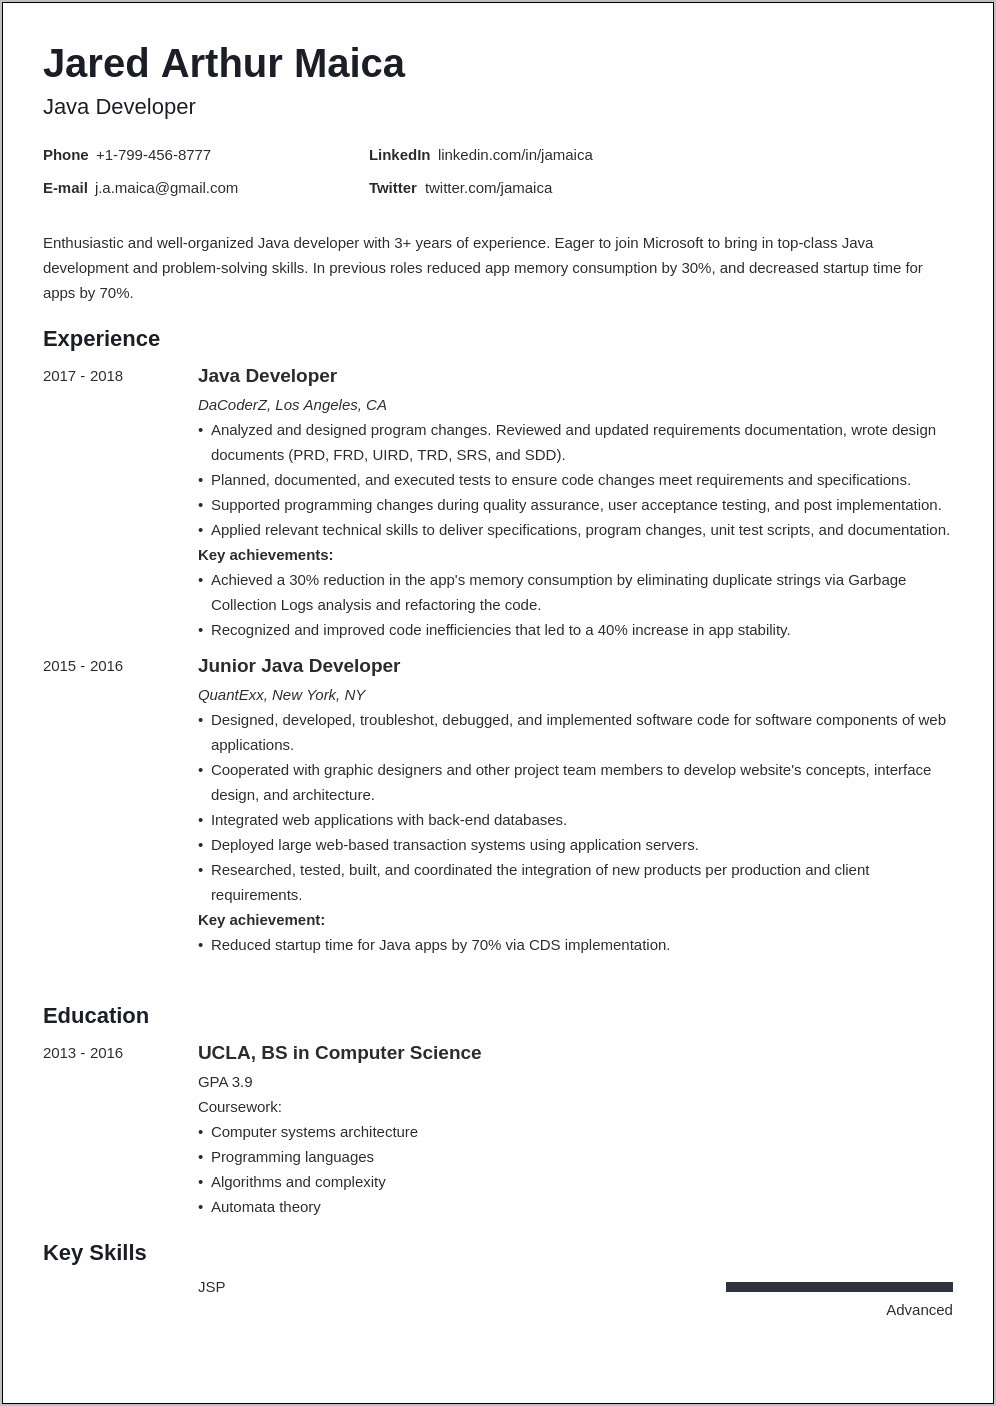 Spring Mongodb Example Project Resume